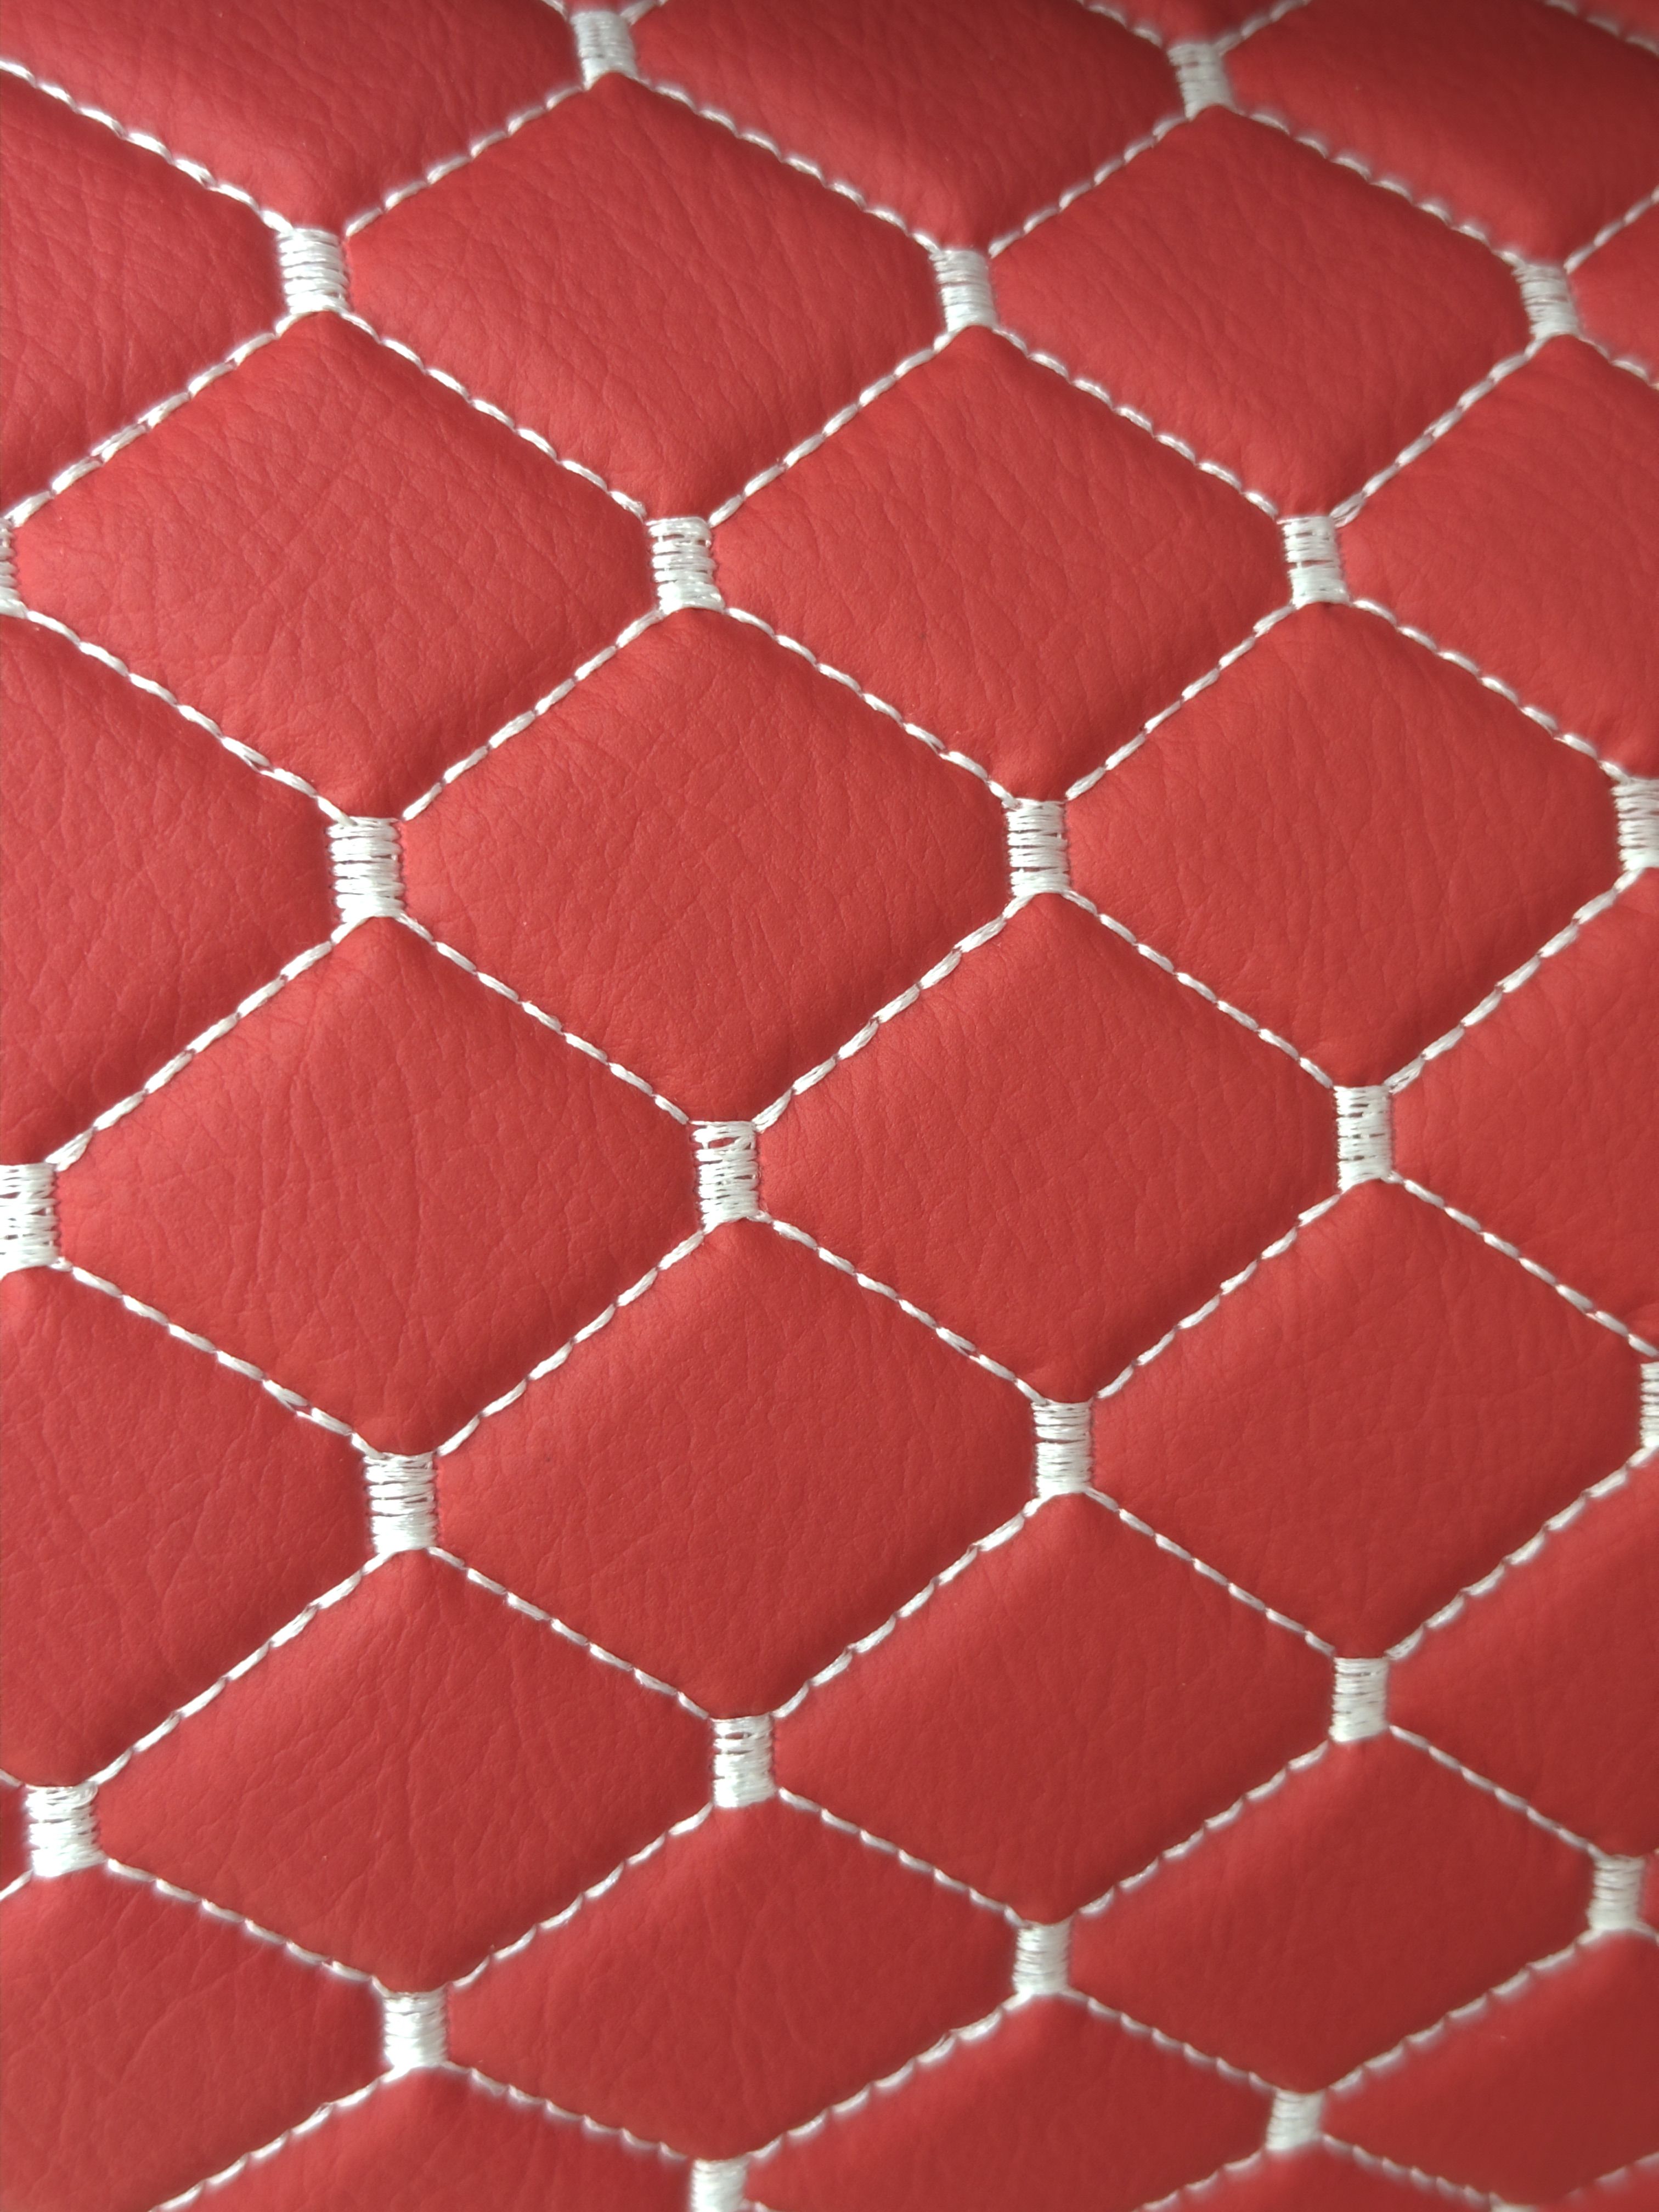 Red White Quilted Vinyl Faux Leather Car Upholstery Fabric | 2"x2" 5x5cm Diamond Stitch with 5mm Foam Backing | 140cm Wide | Automotive Projects